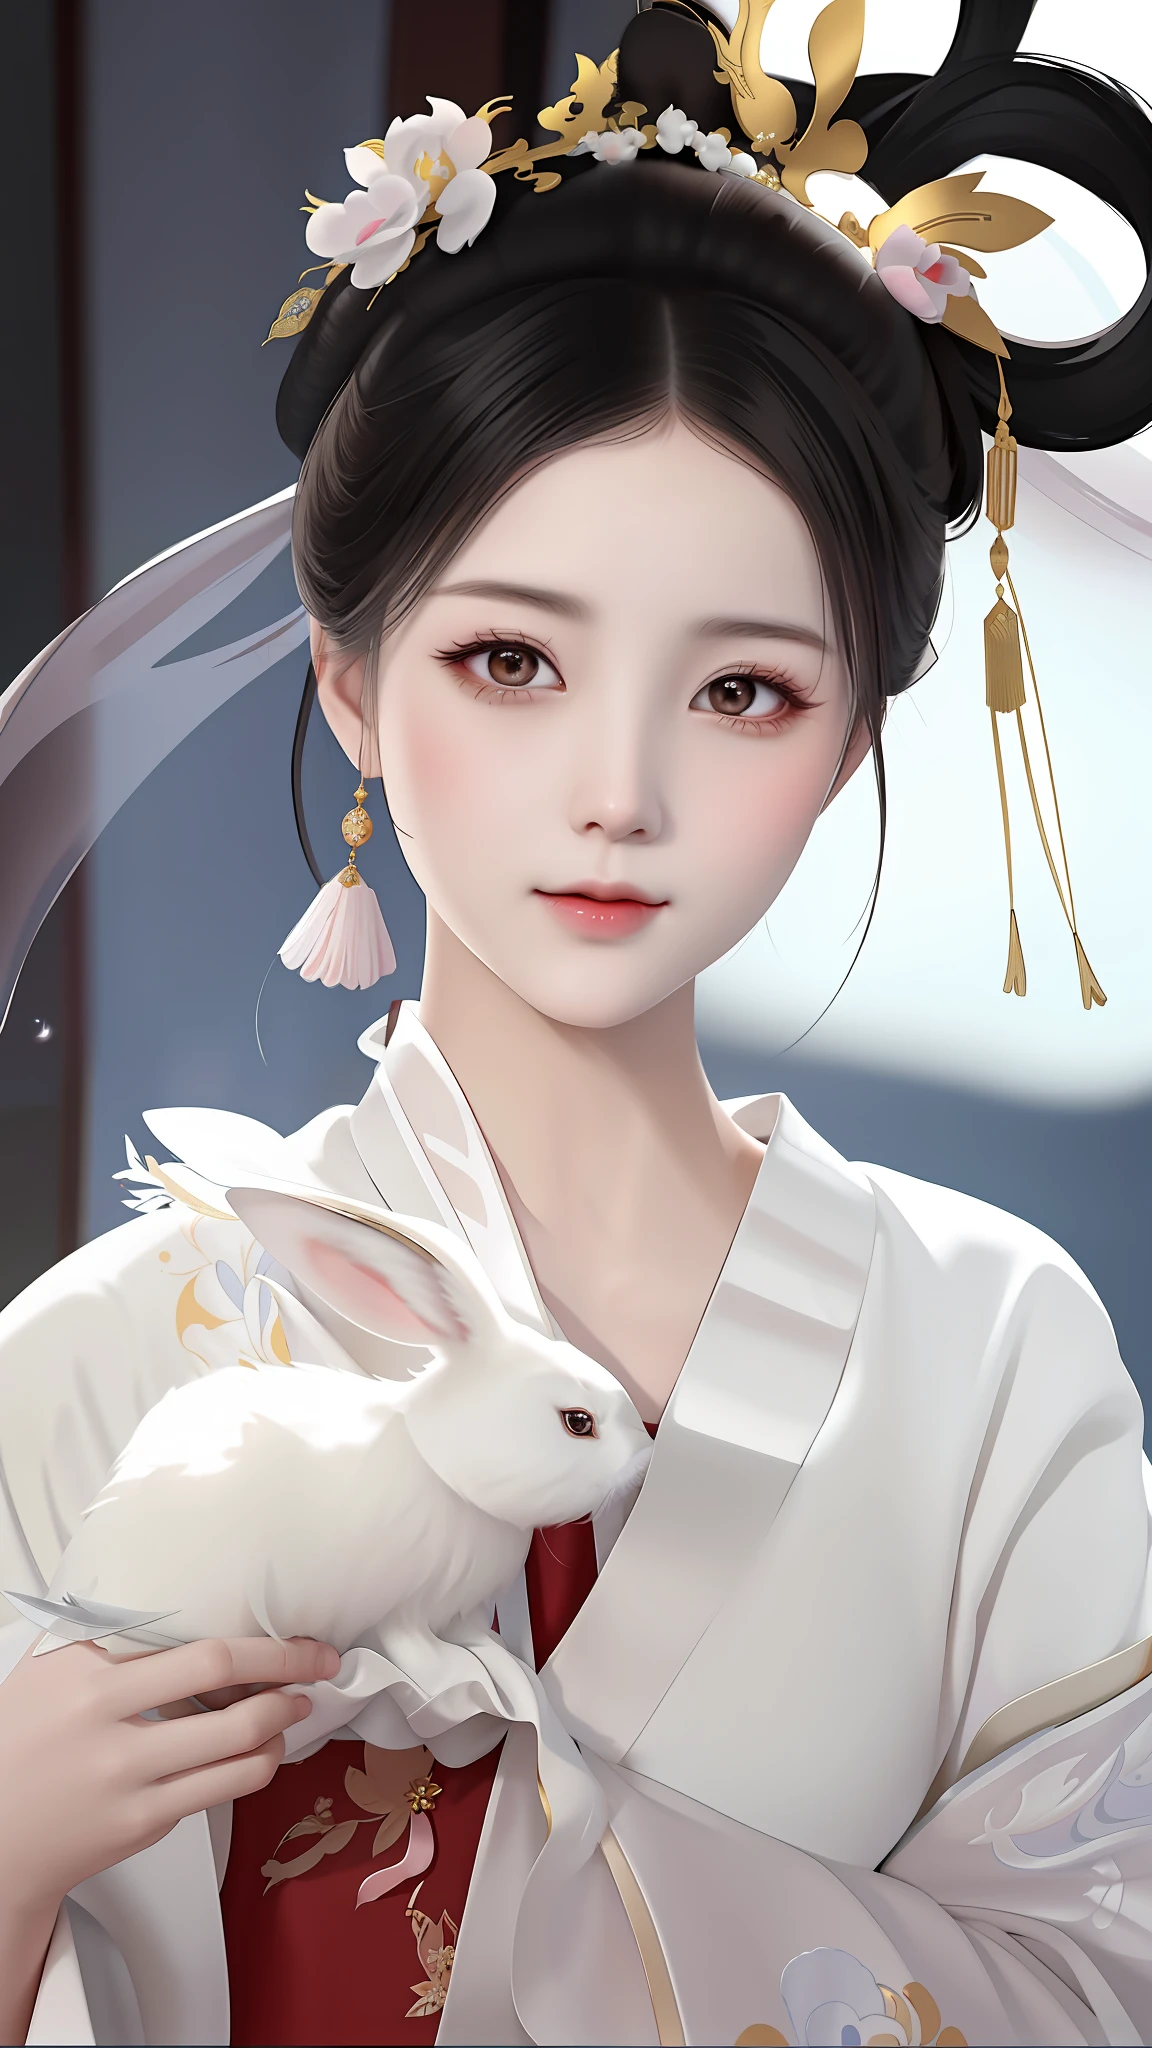 There was a woman in a white dress holding a white rabbit, Palace ， A girl in Hanfu, Beautiful character painting, Guviz-style artwork, ancient chinese beauti, Chinese girl, Traditional beauty, Beautiful digital artwork, White Hanfu, Guviz, Princesa chinesa antiga, Chinese style, China Princess, a beautiful fantasy empress, a beautiful anime portrait